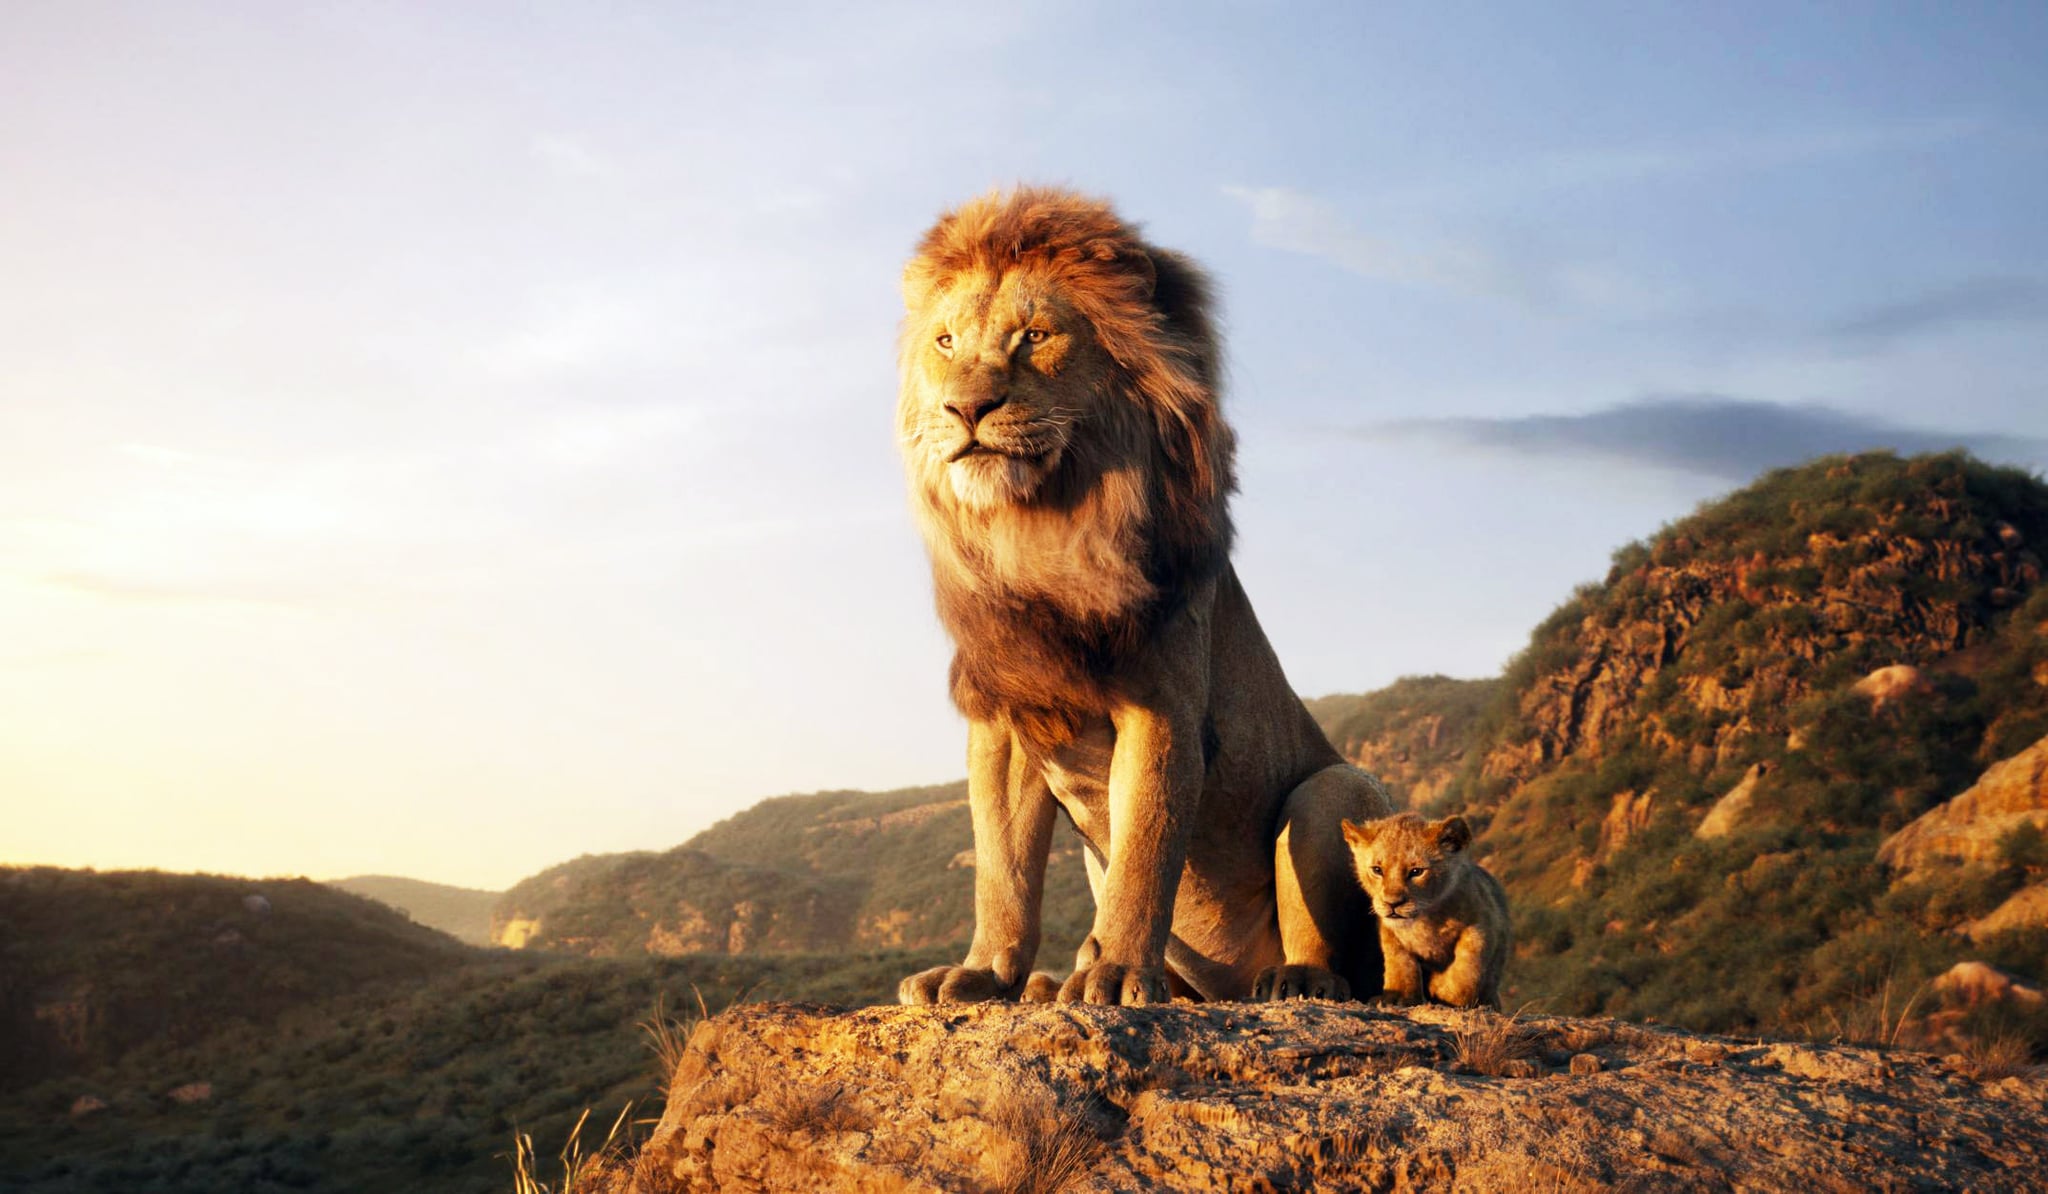 THE LION KING, from left:  Mufasa (voice: James Earl Jones), young Simba (voice: JD McCrary), 2019.  Walt Disney Studios Motion Pictures / courtesy Everett Collection